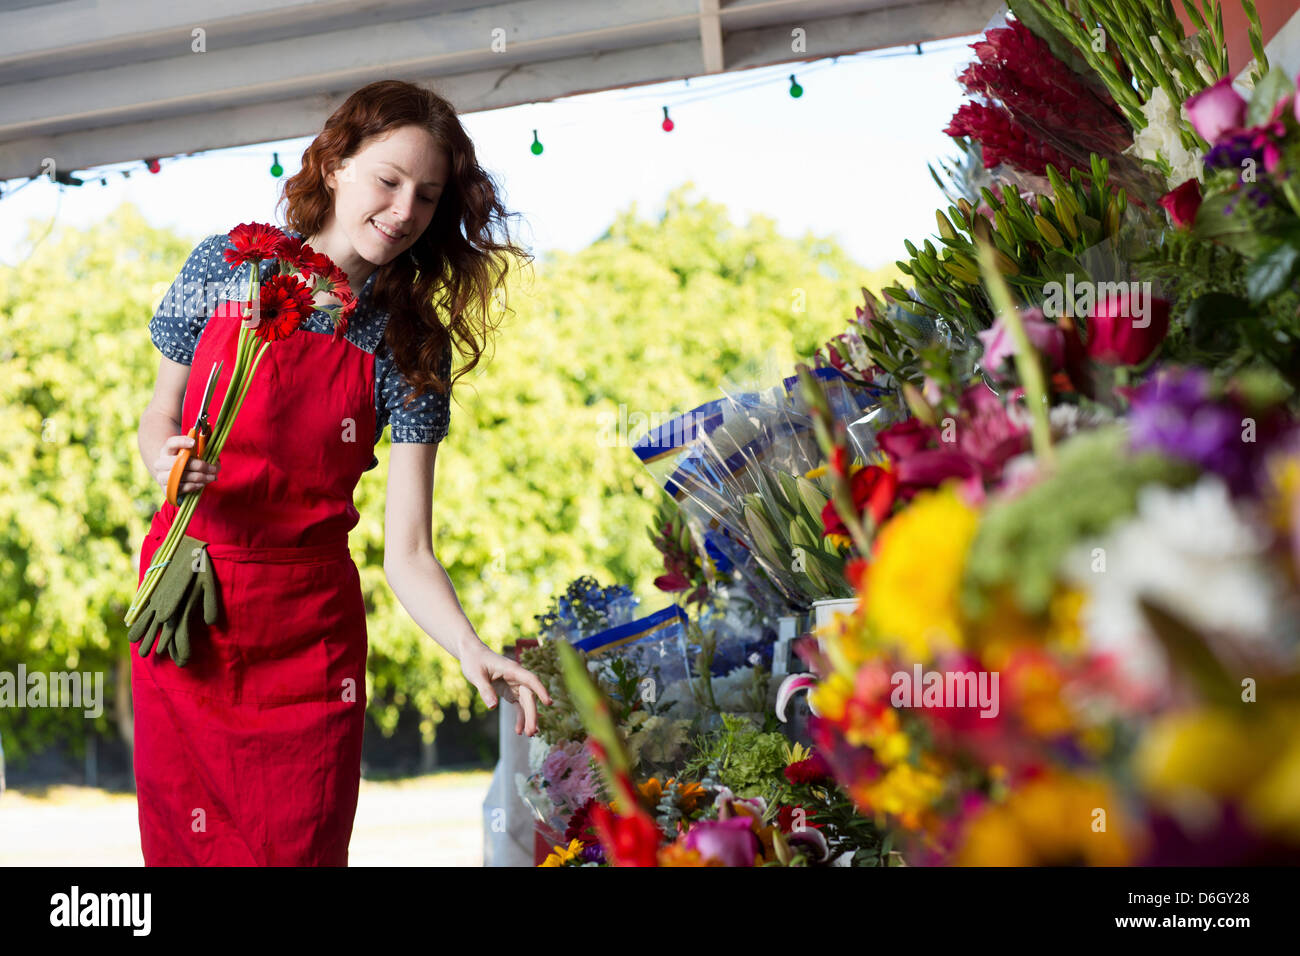 Florist working in shop Stock Photo